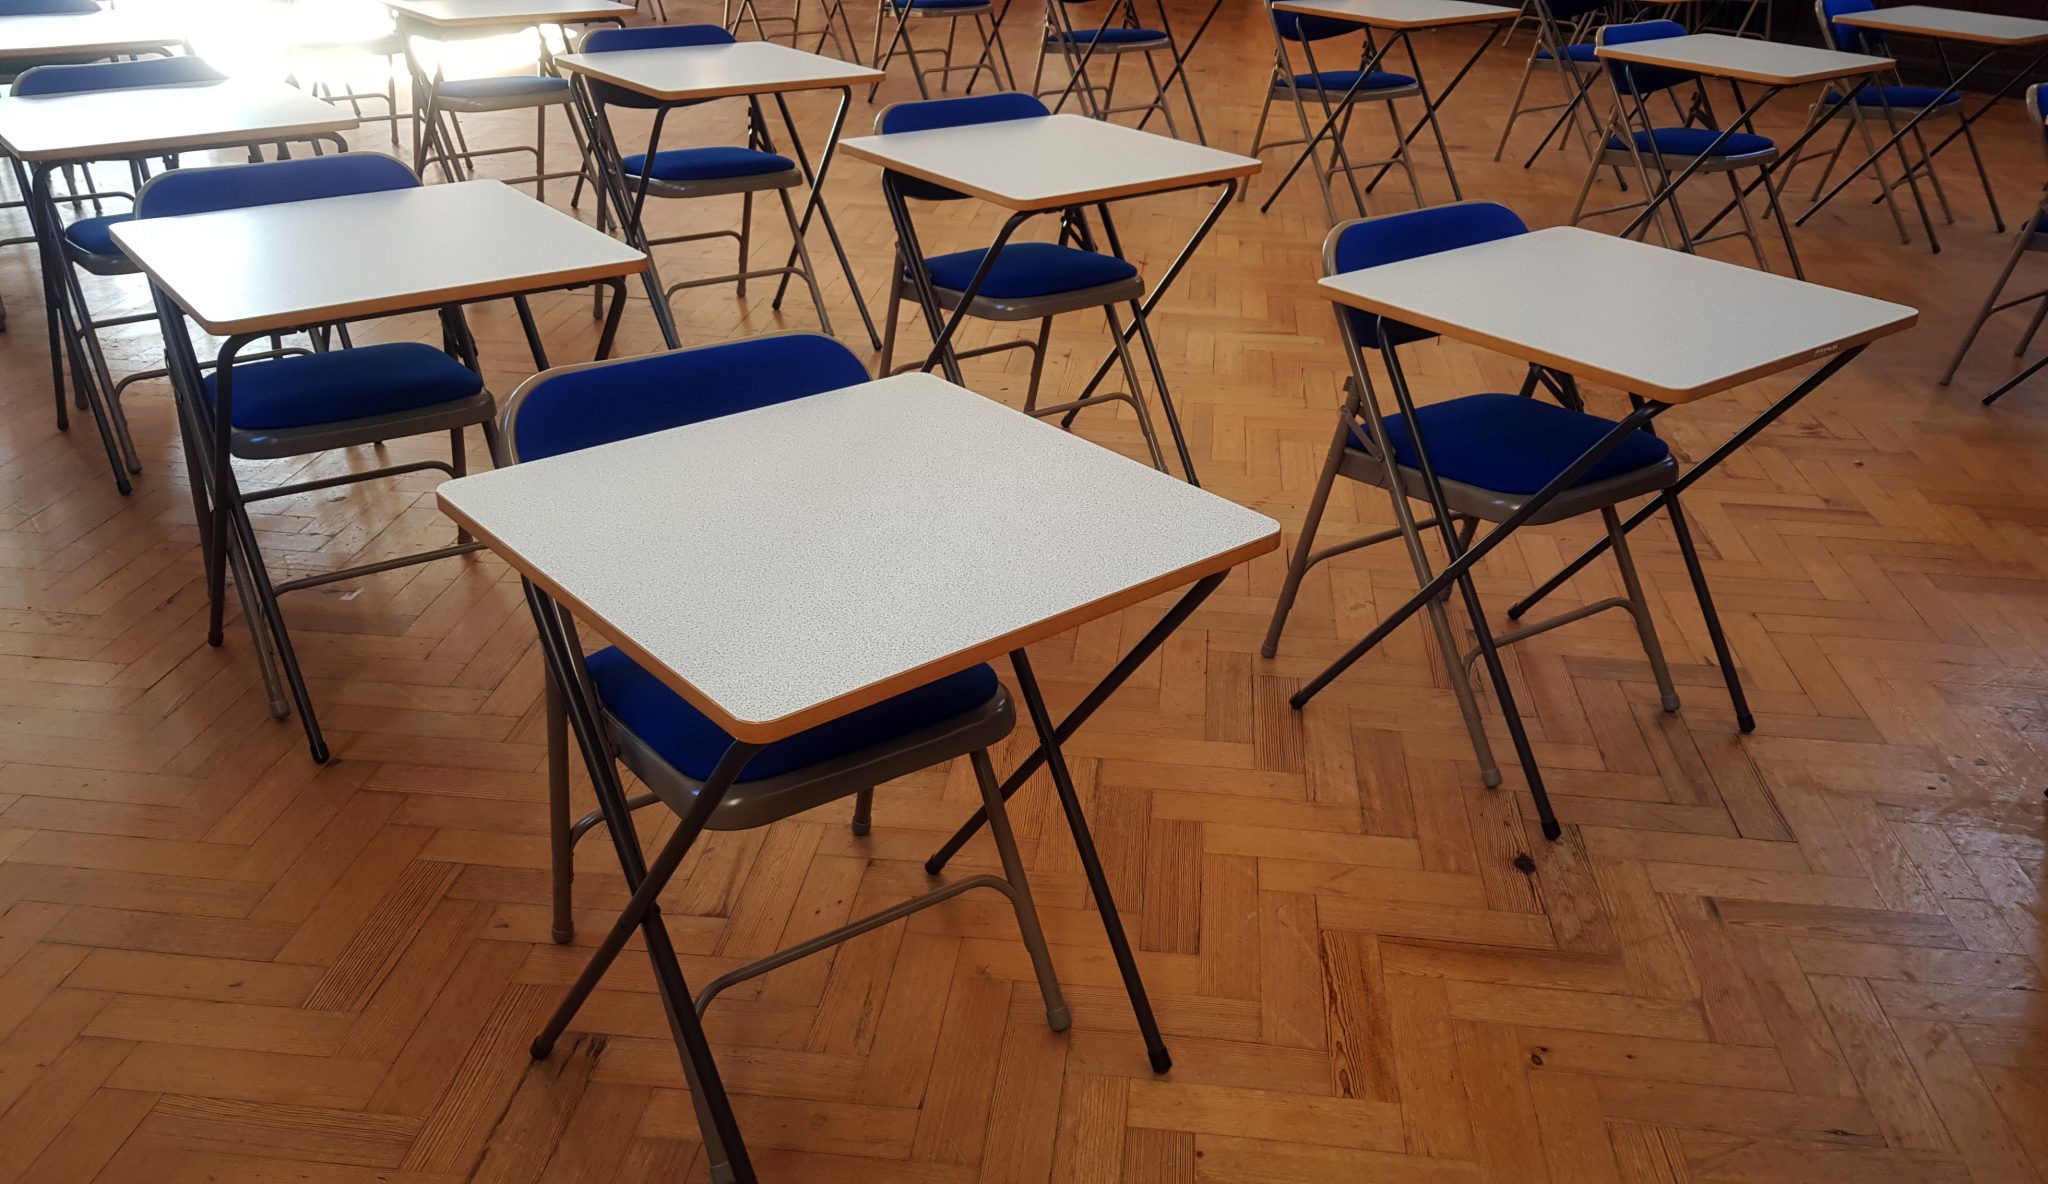 Leaving Cert students who suffer bereavement permitted to postpone exams